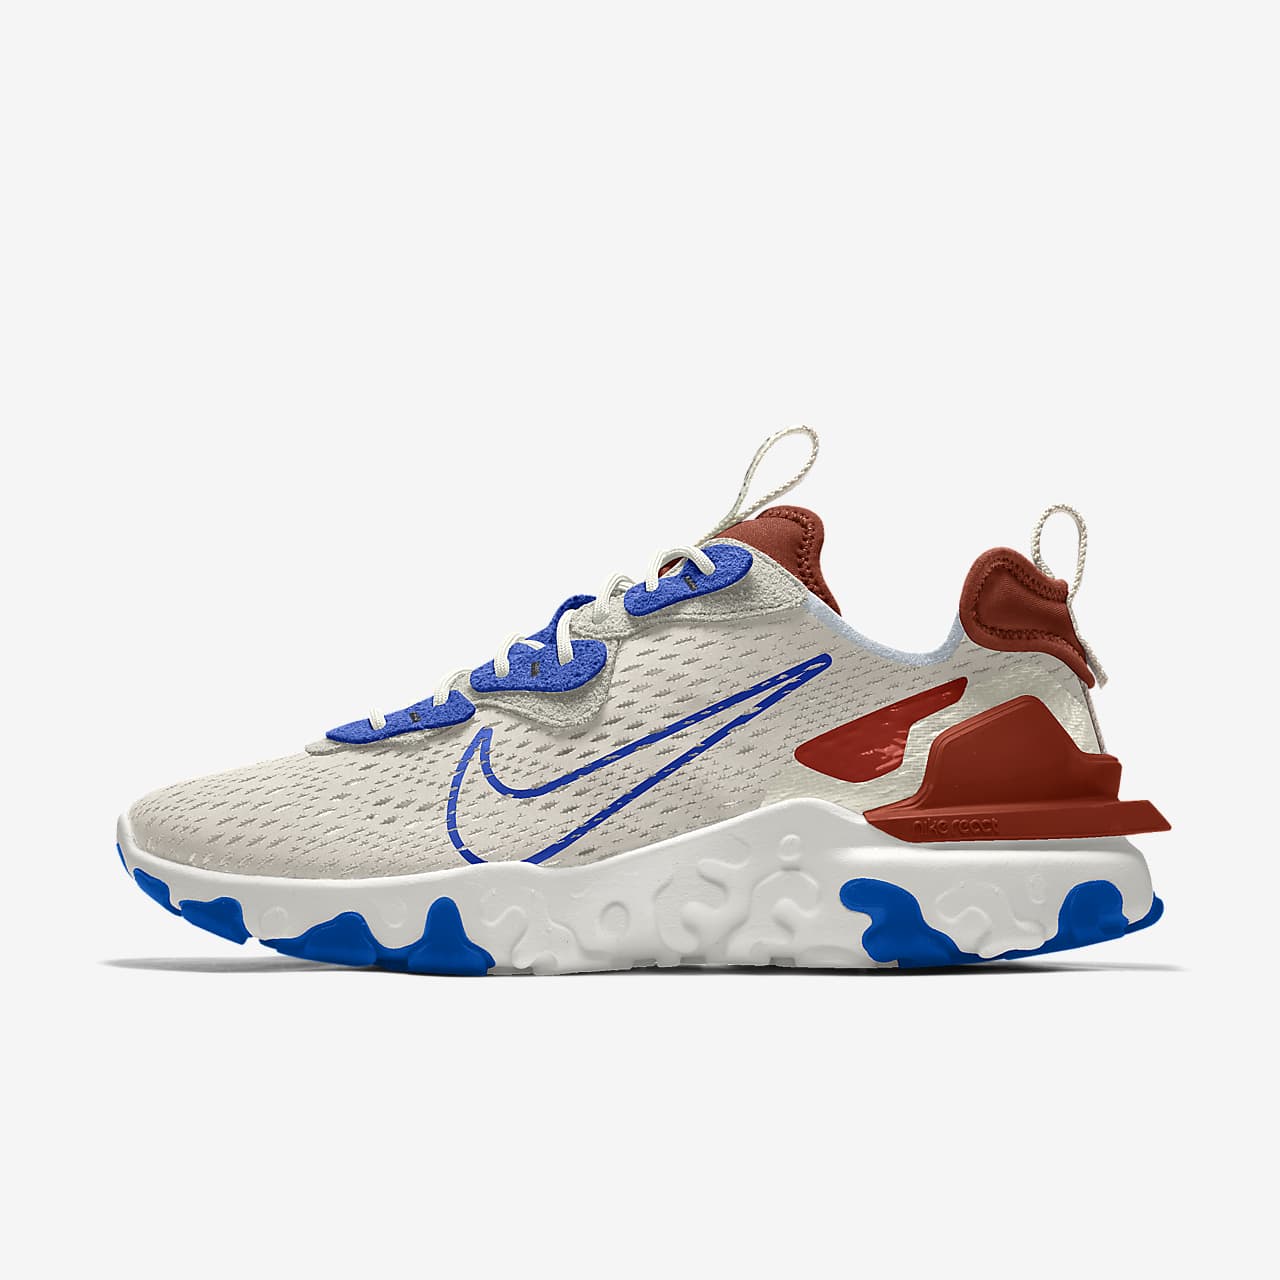 Scarpa lifestyle personalizzabile Nike React Vision By You - Uomo